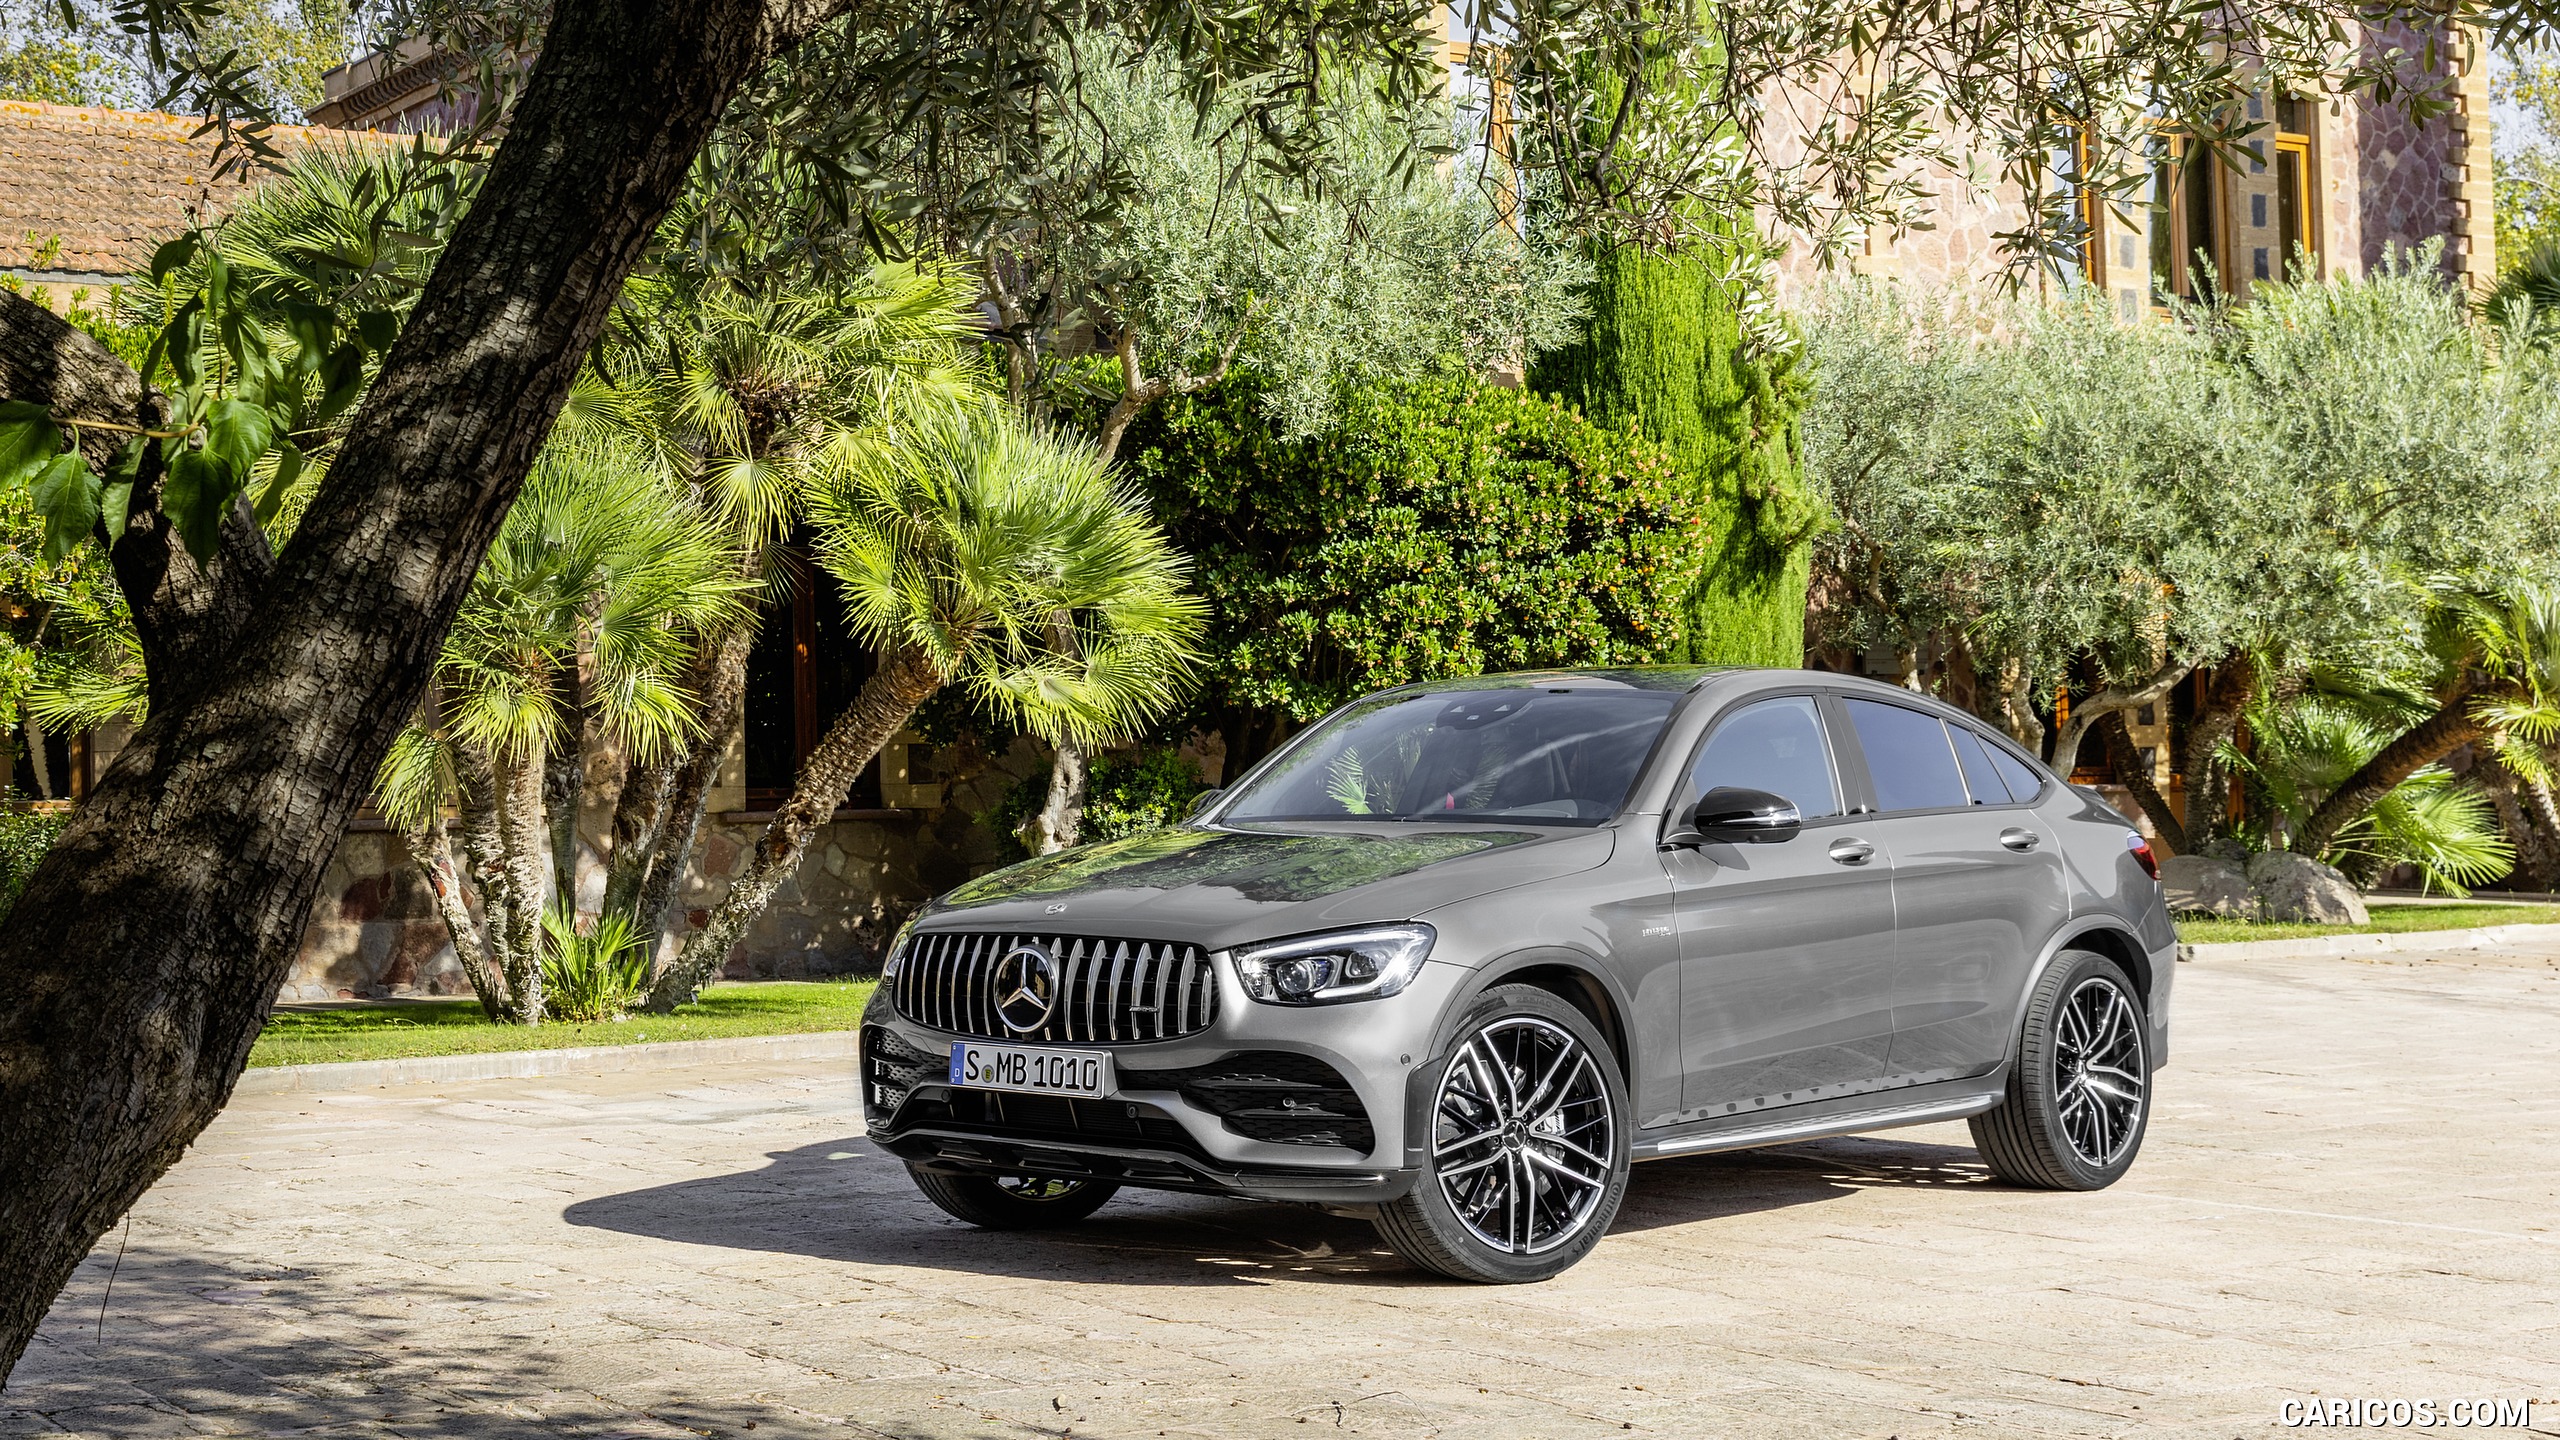 2020 Mercedes-AMG GLC 43 4MATIC Coupe - Front Three-Quarter, #13 of 173